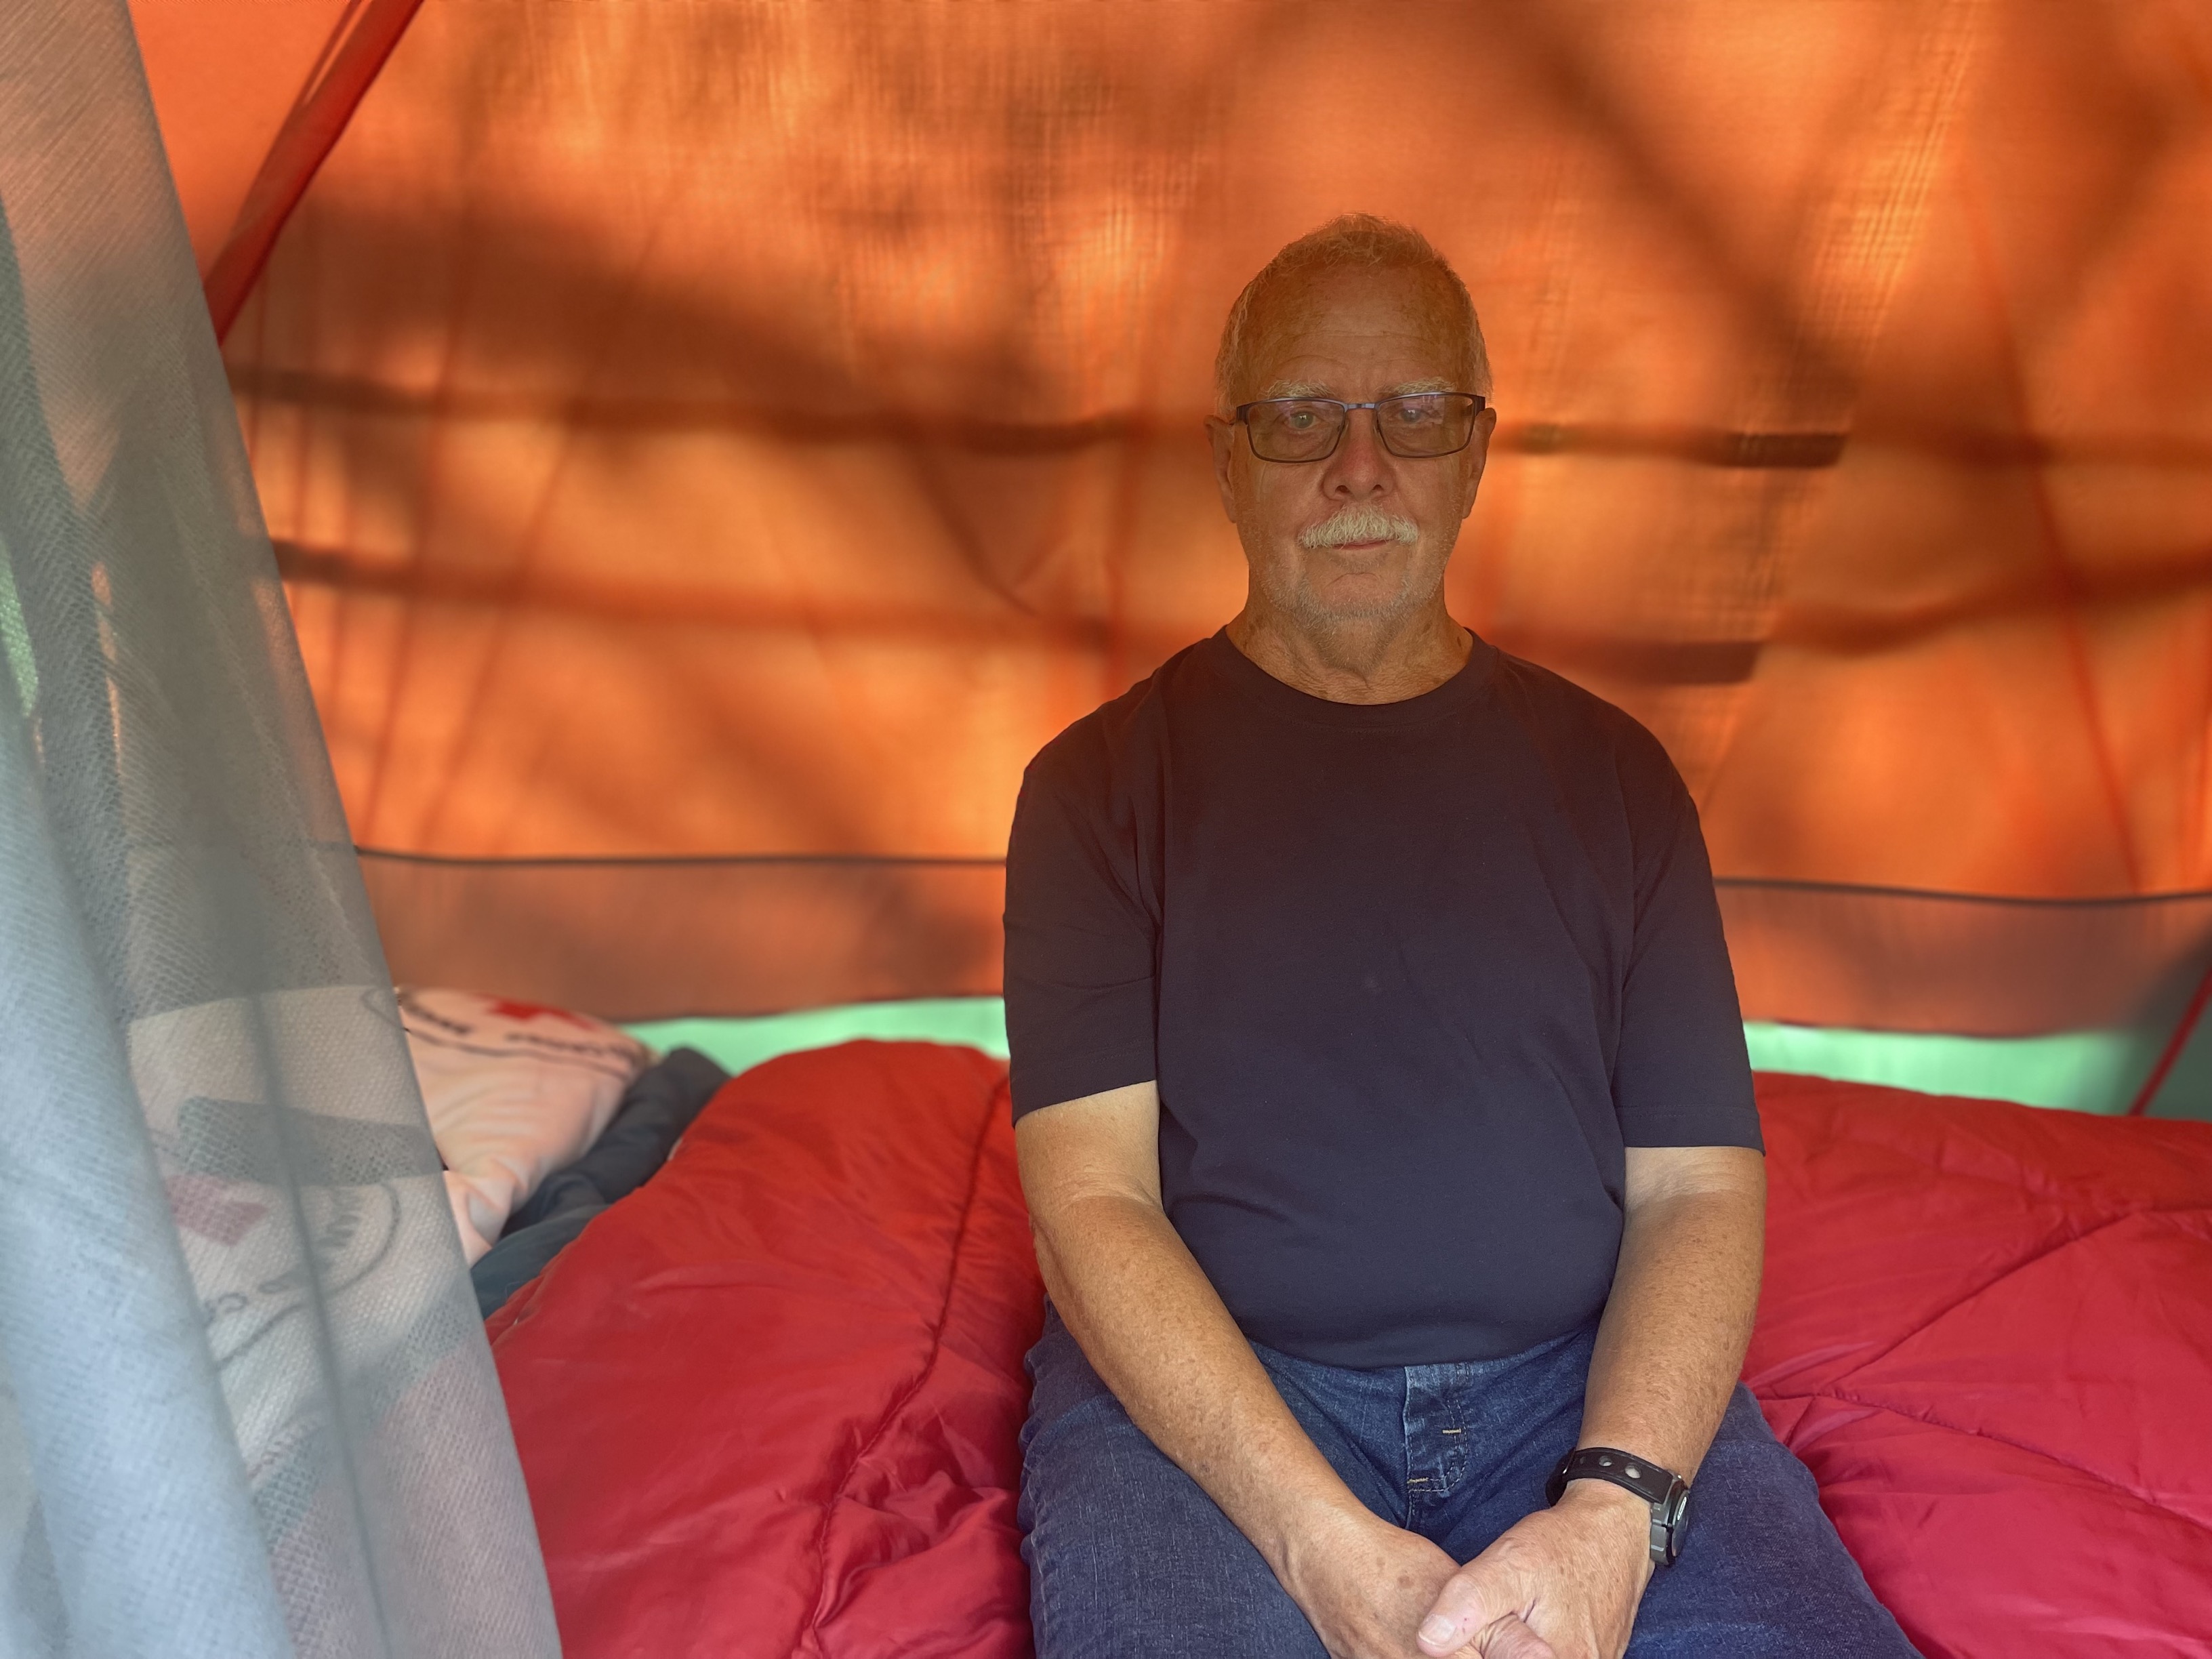 Unable to find housing, Halifax senior lives in tent: ‘What you see is what I’ve got’